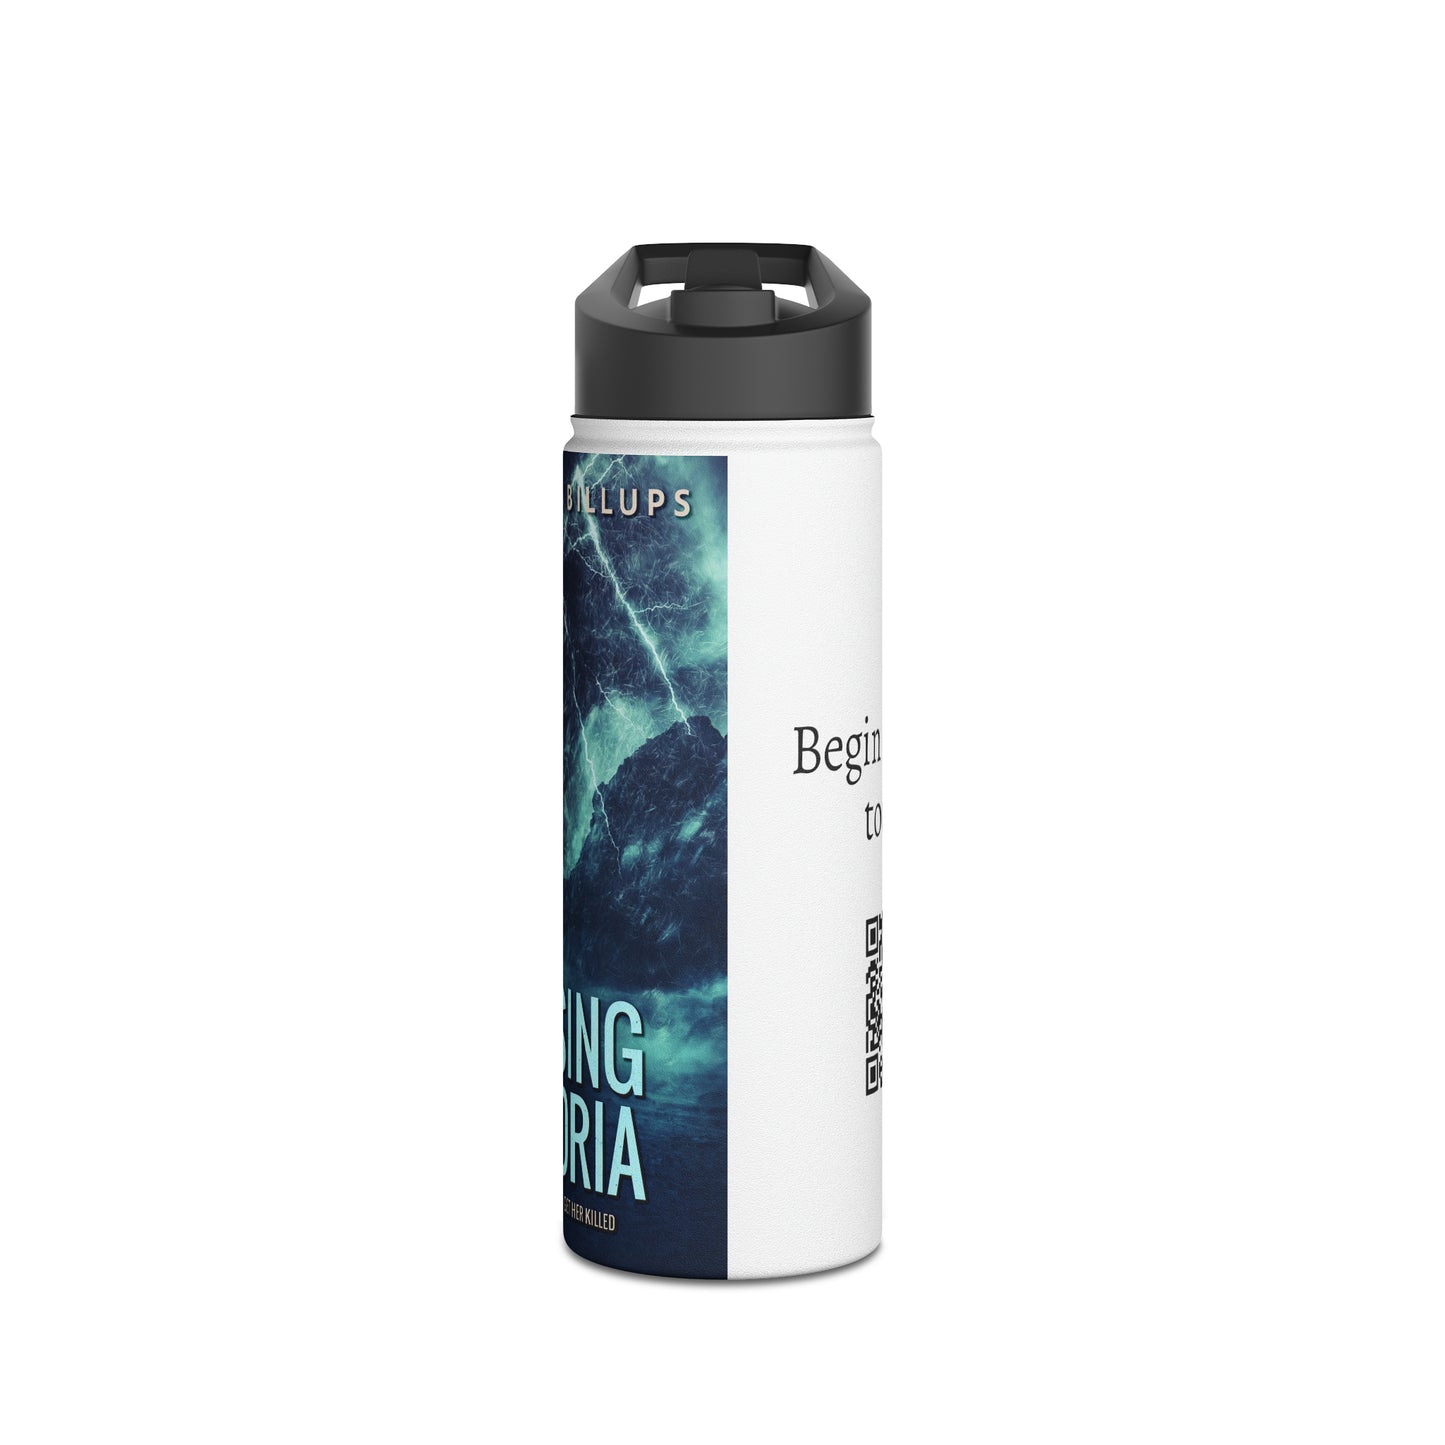 Chasing Victoria - Stainless Steel Water Bottle